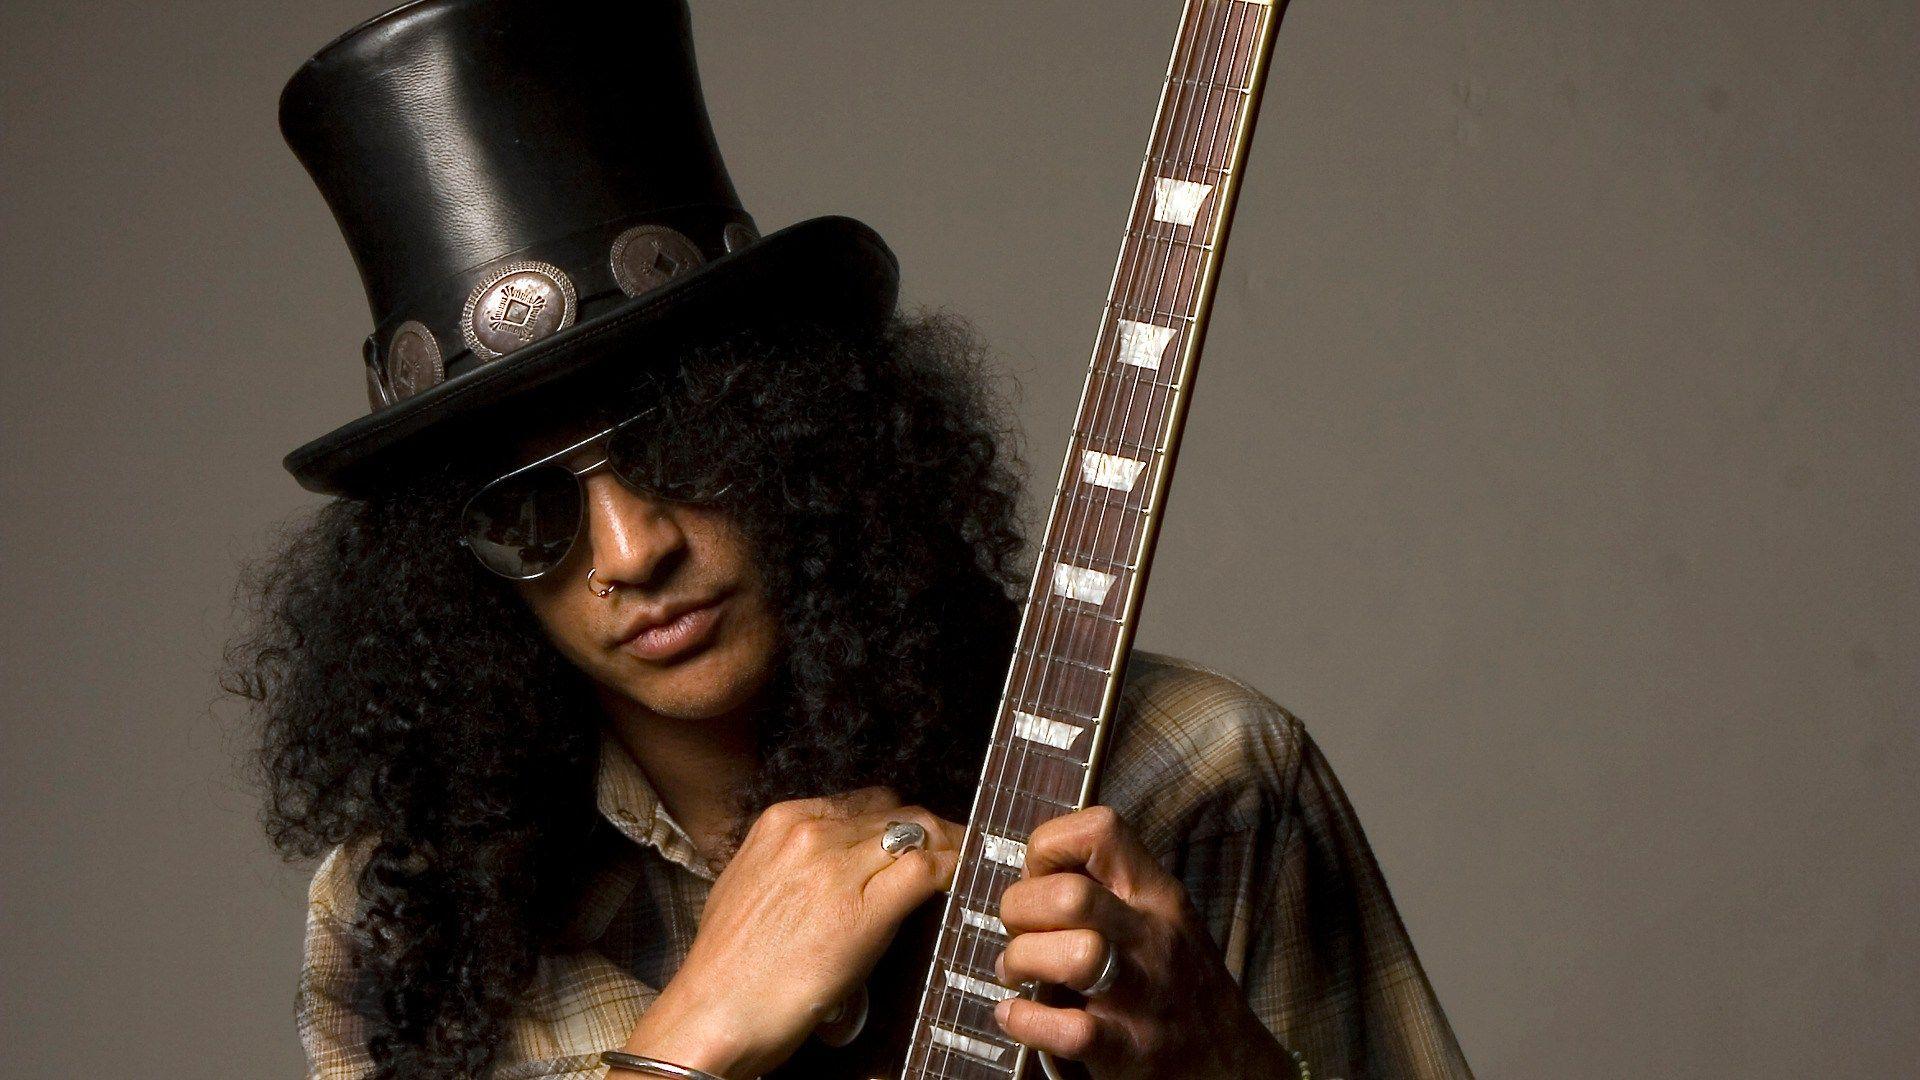 GUNS N' ROSES' Guitarist Slash Says He Once Got Crabs From A Fan